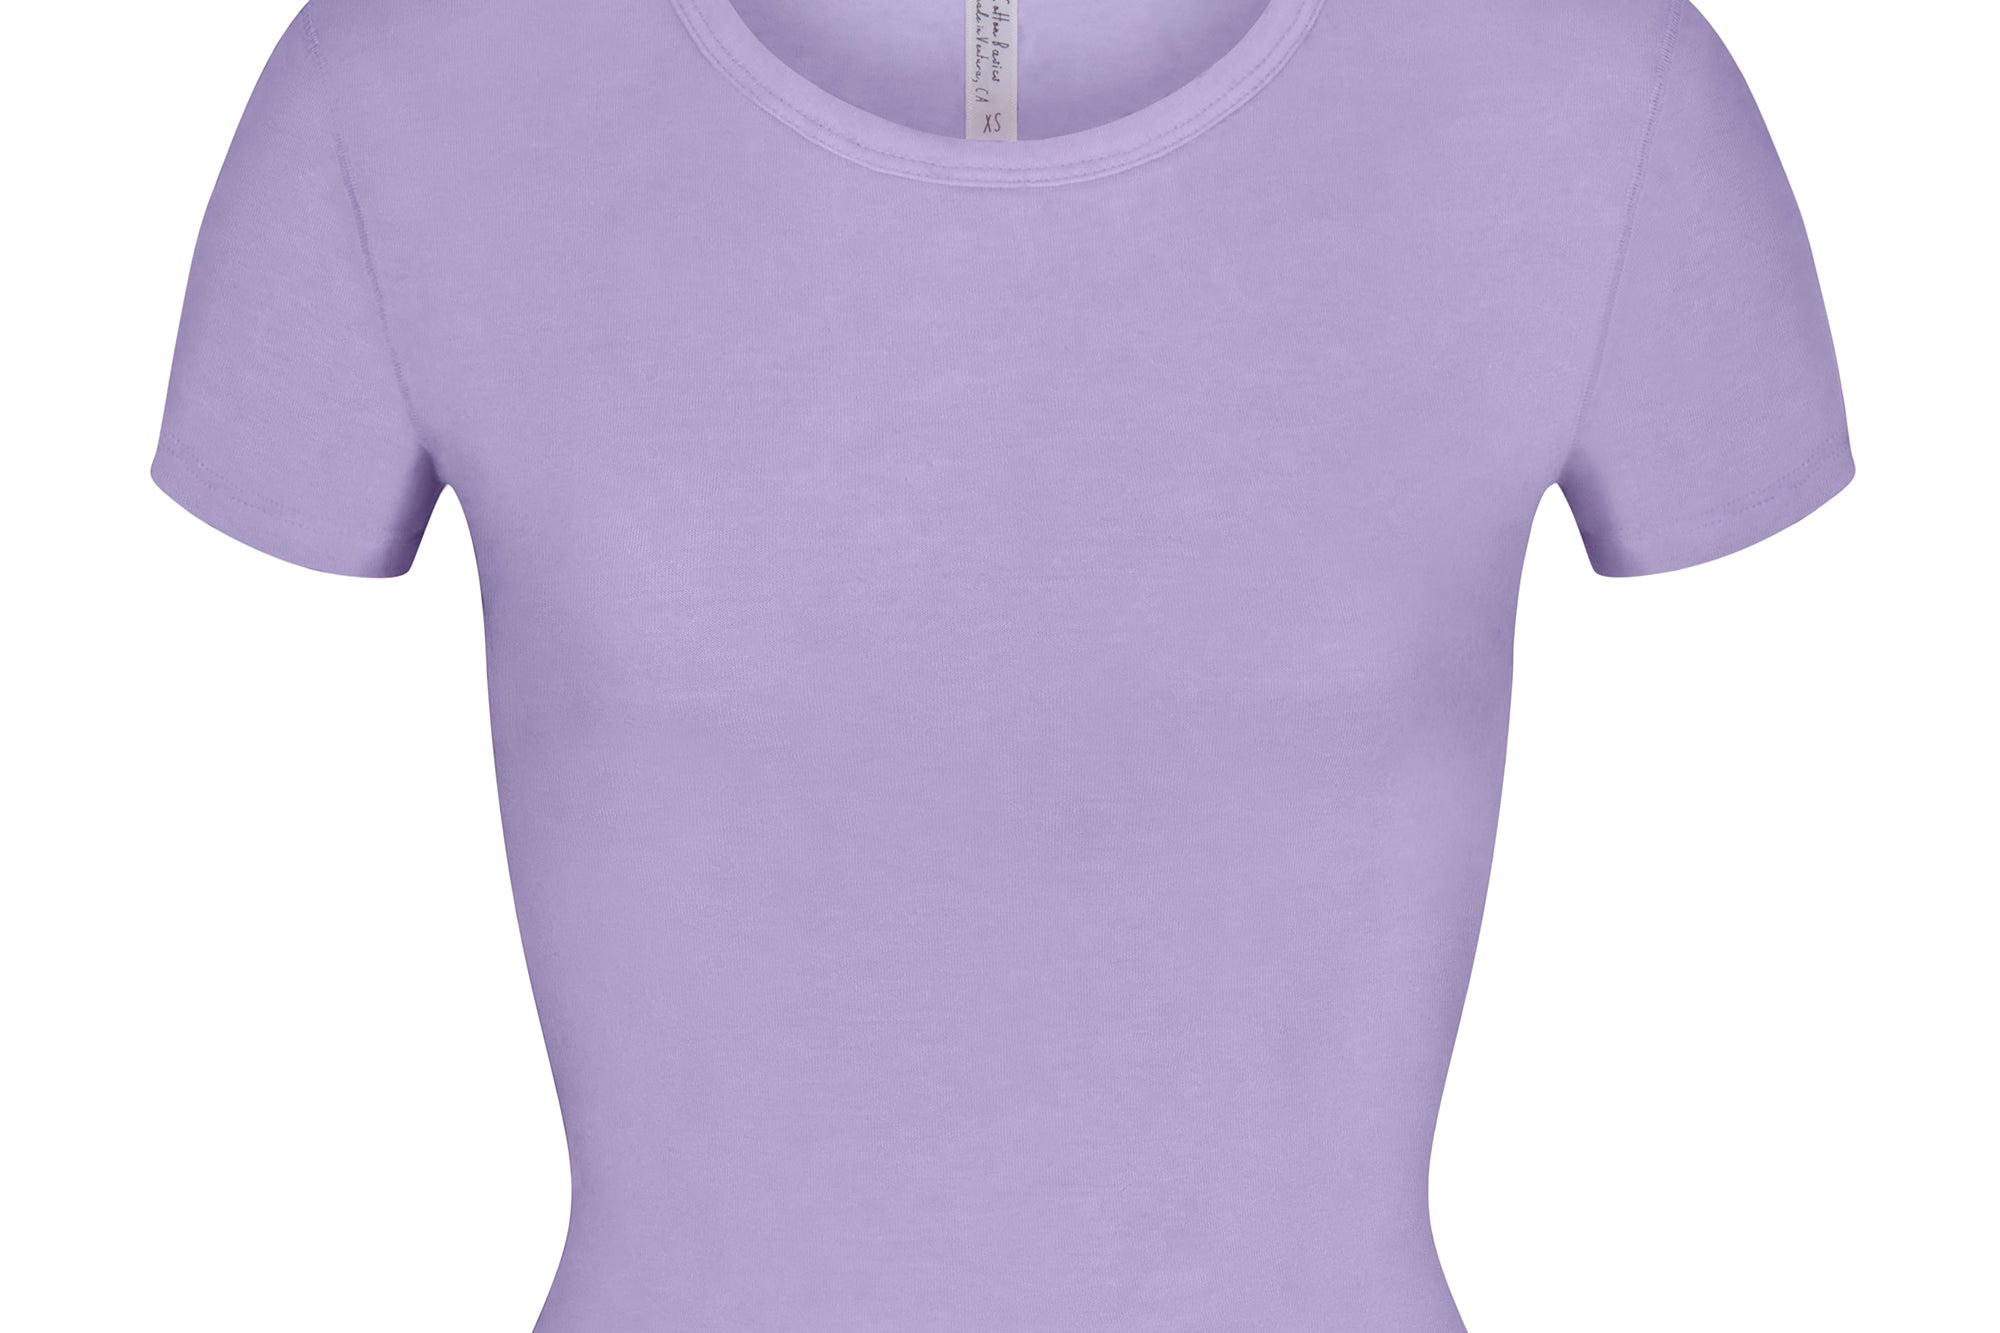 EVERY DAY BABY TEE IN ORCHID